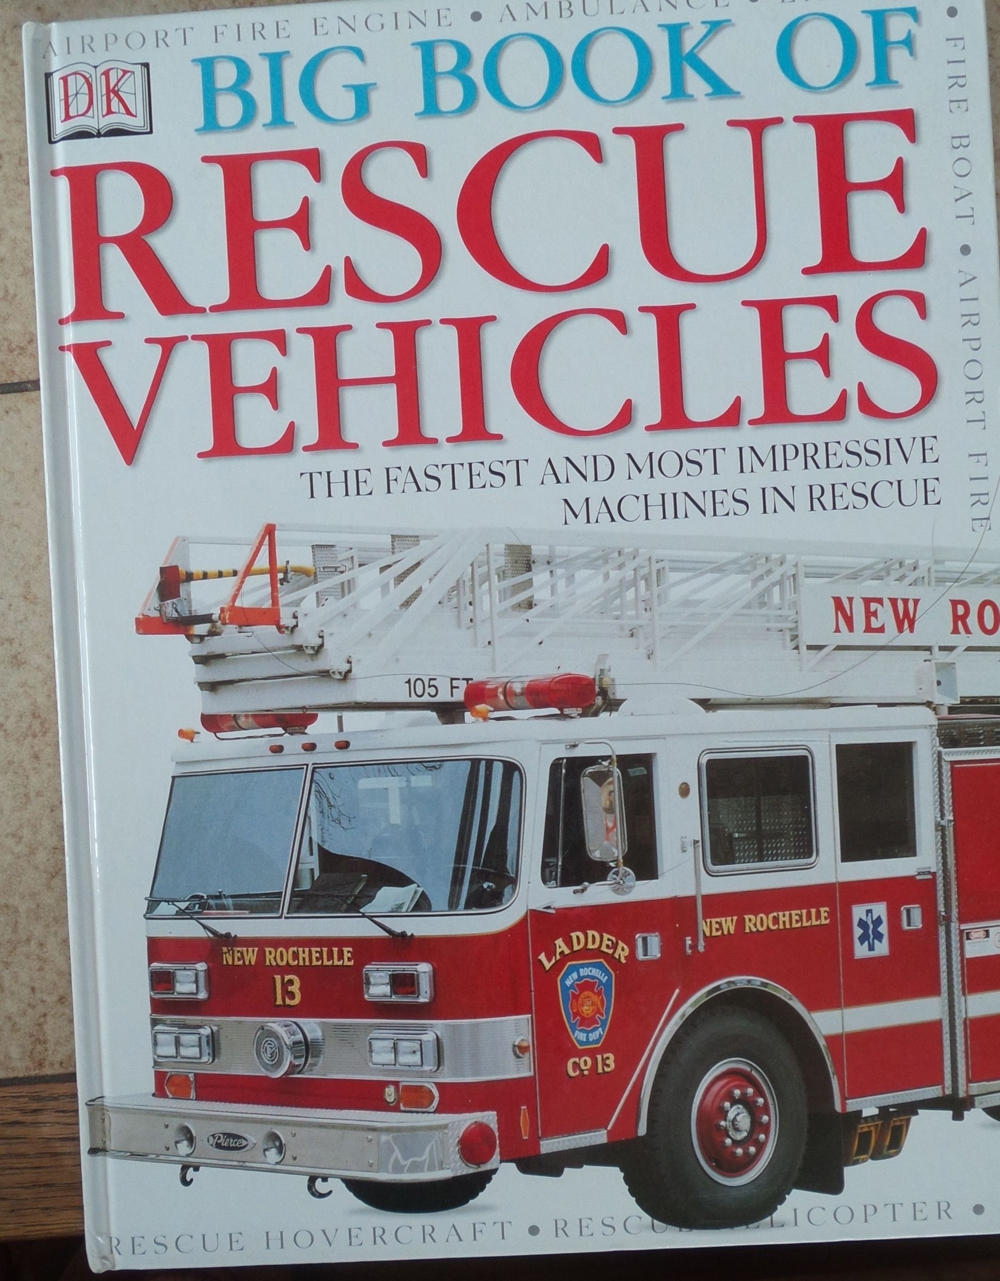 Big Book of Rescue Vehicles